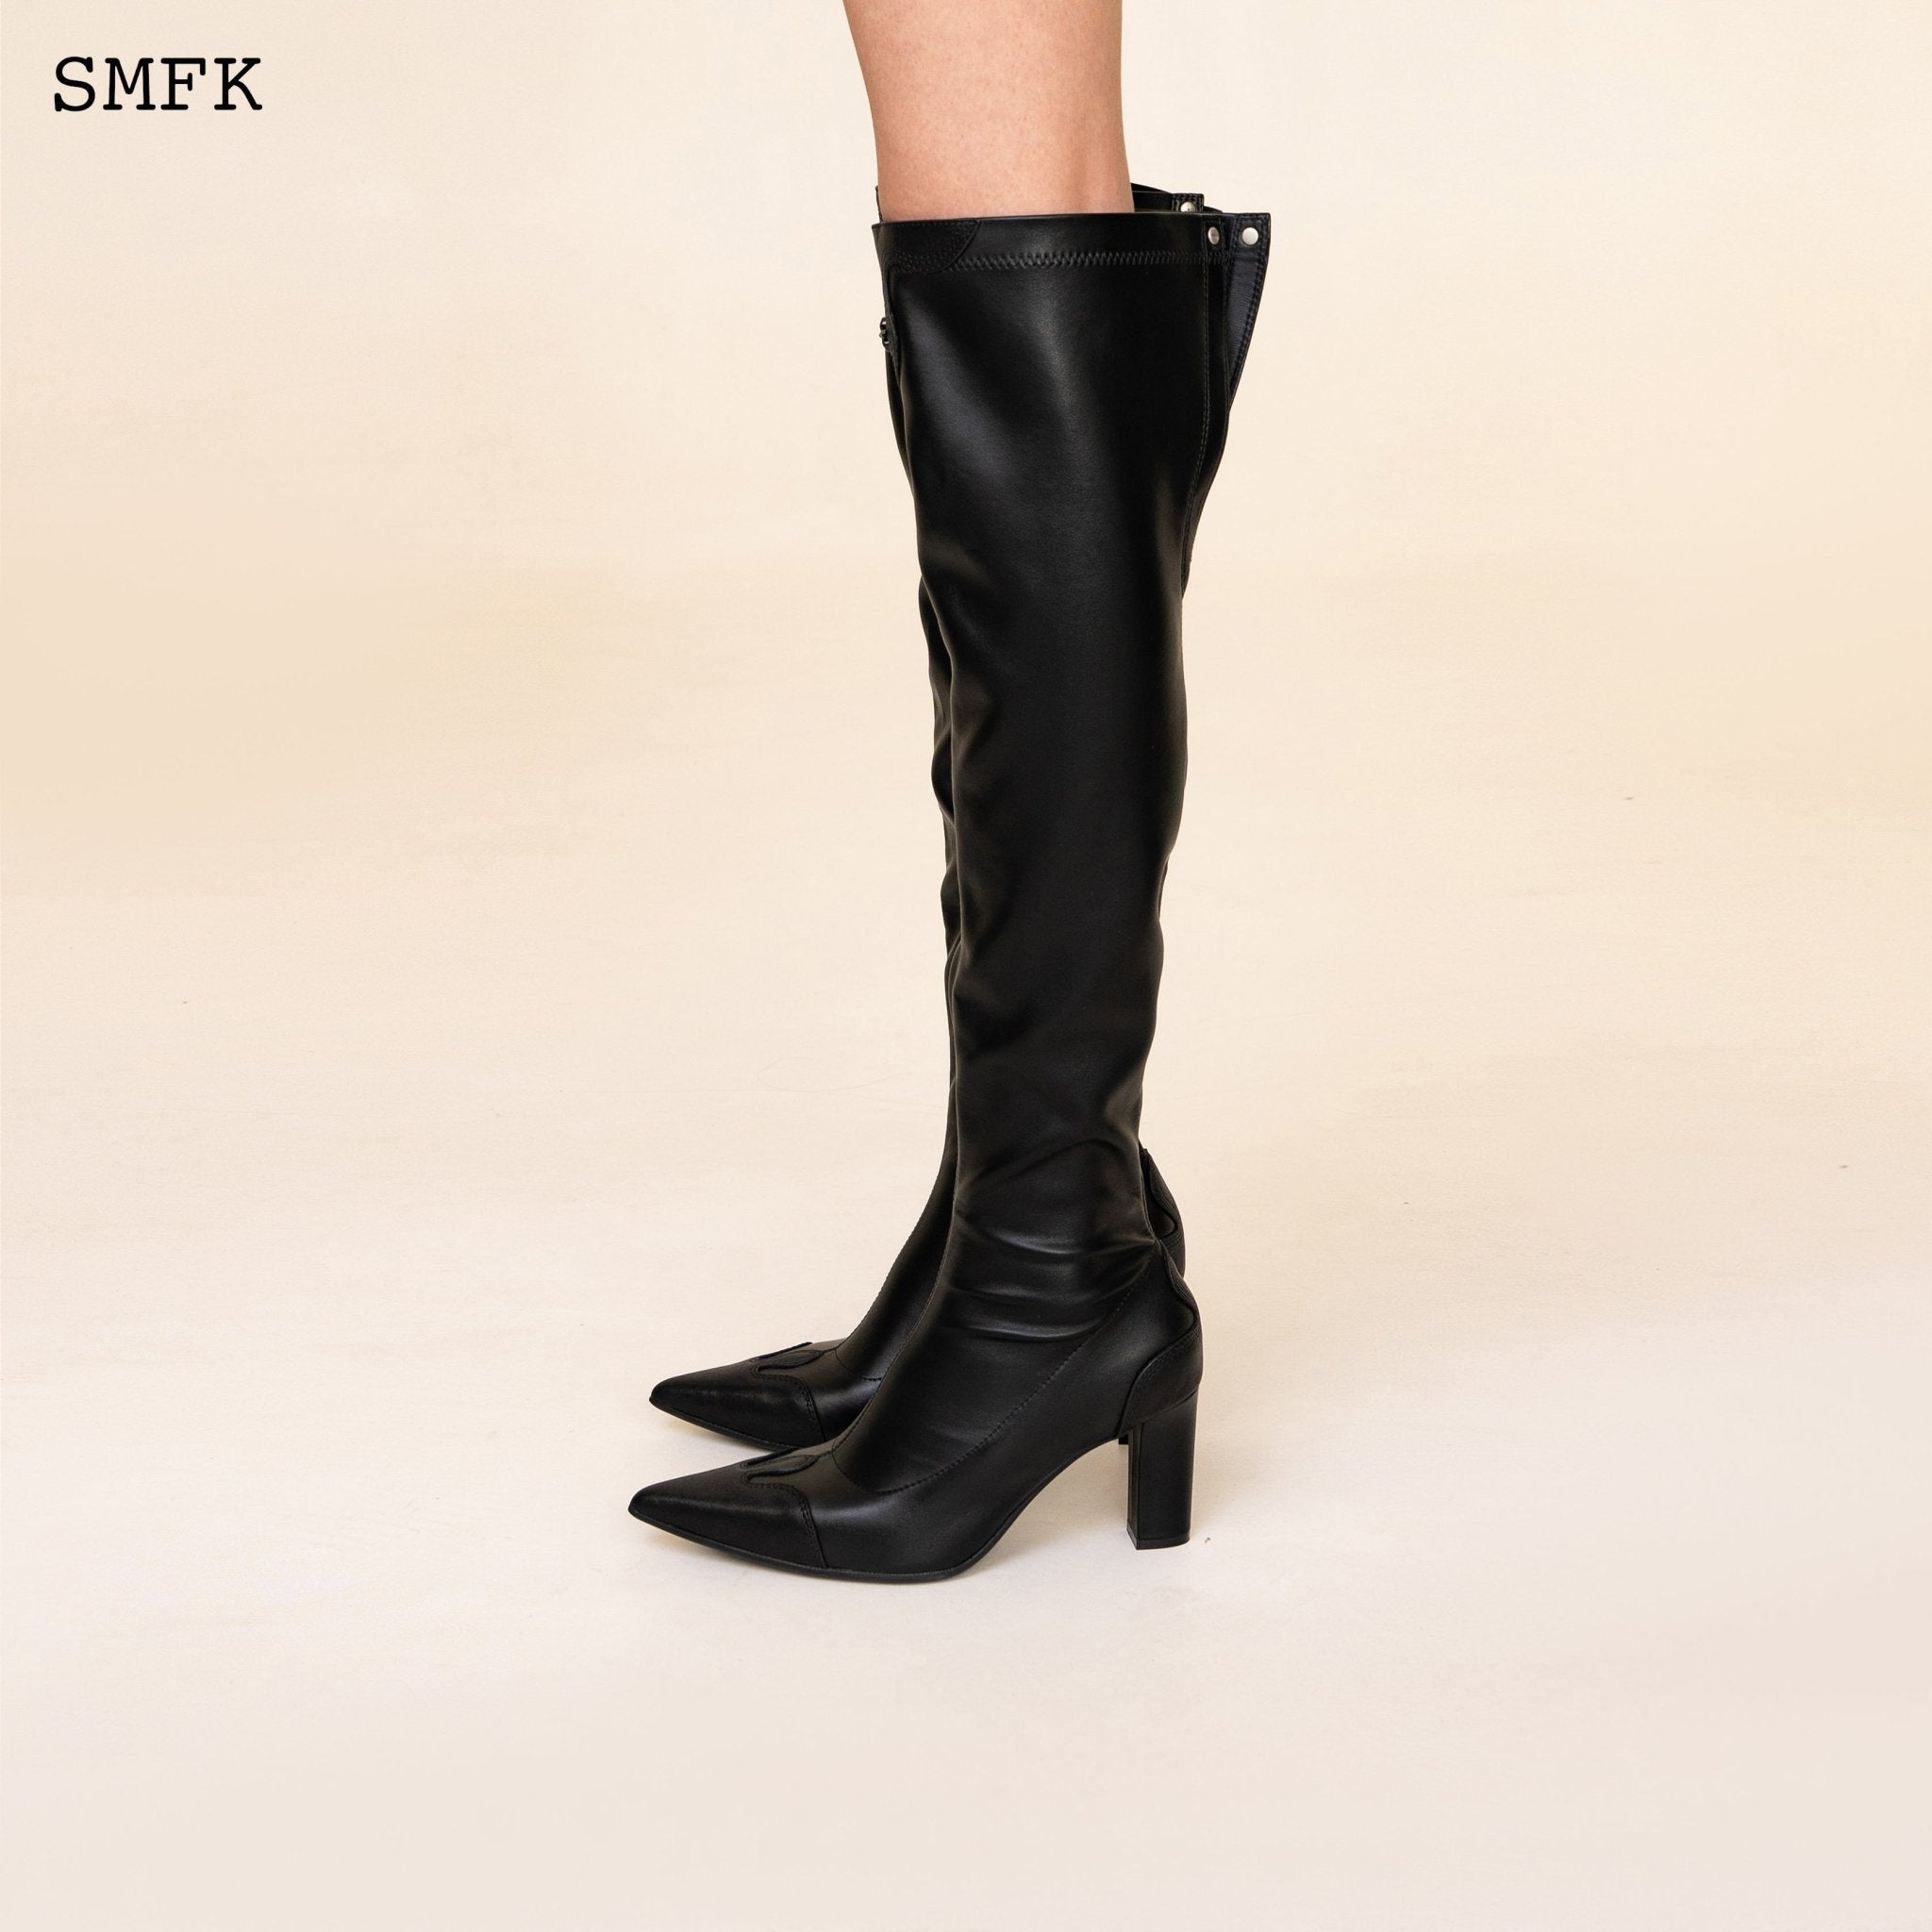 SMFK Compass Cross Black Leather over-the-knee Boots | MADA IN CHINA